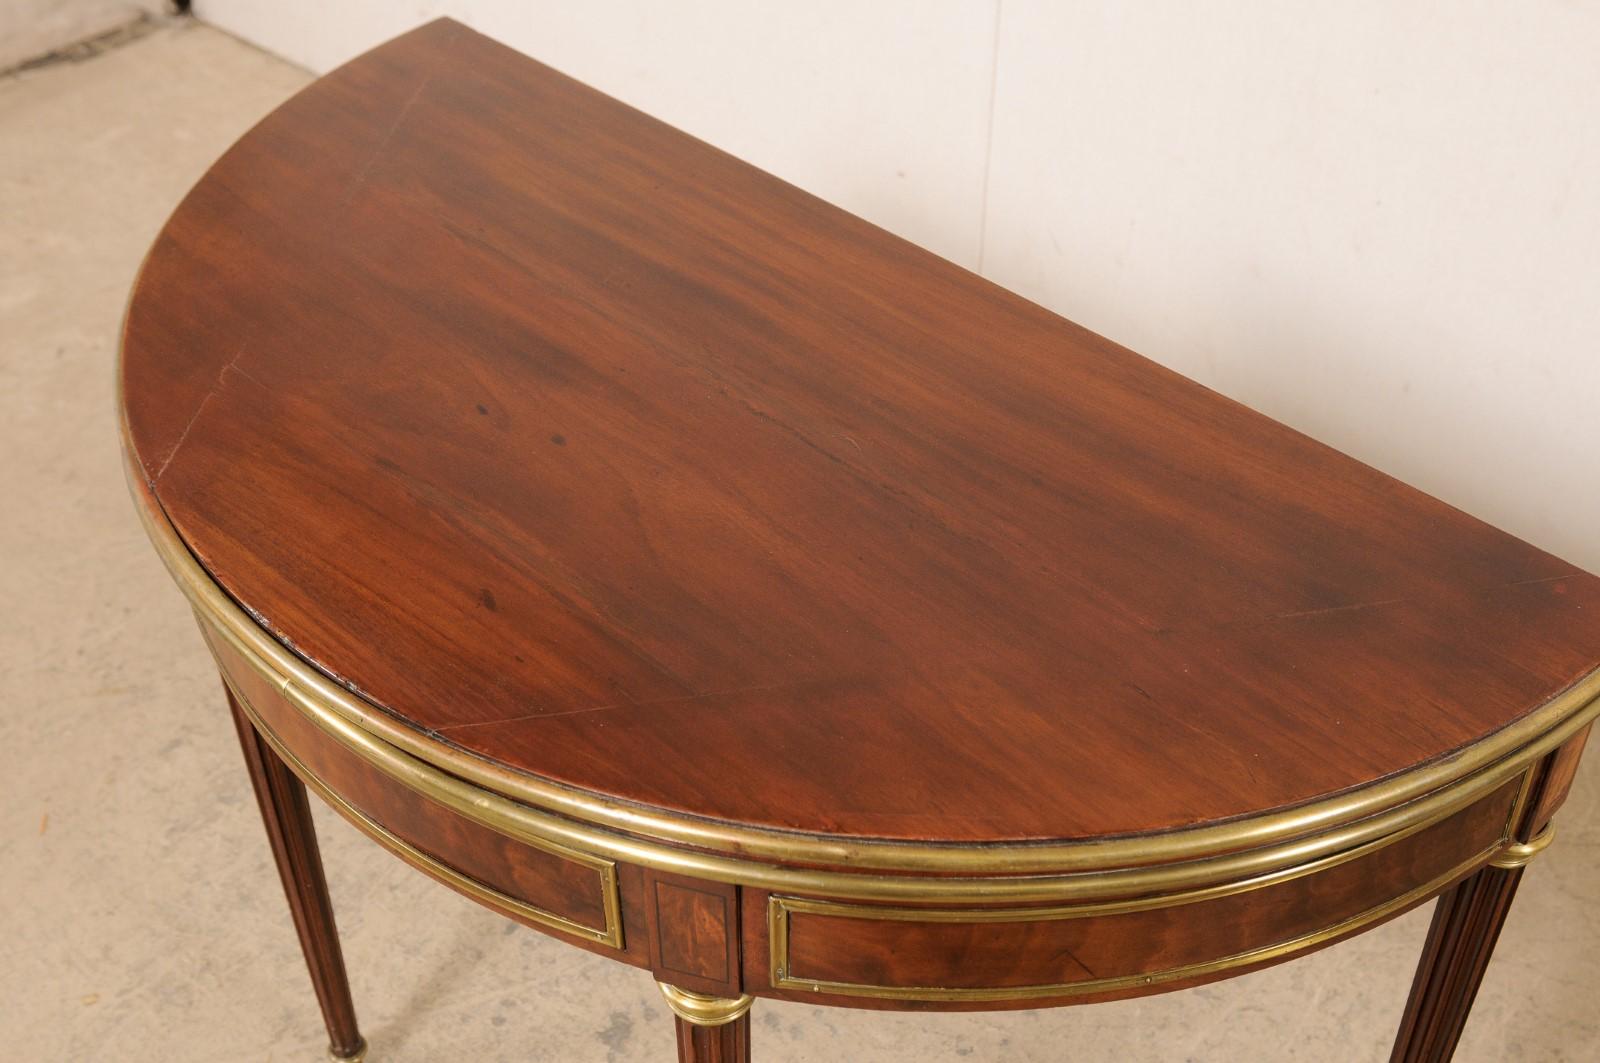  Elegant French Neoclassical Demi-to-round Table W/ Brass Accents, 19th C.  For Sale 1